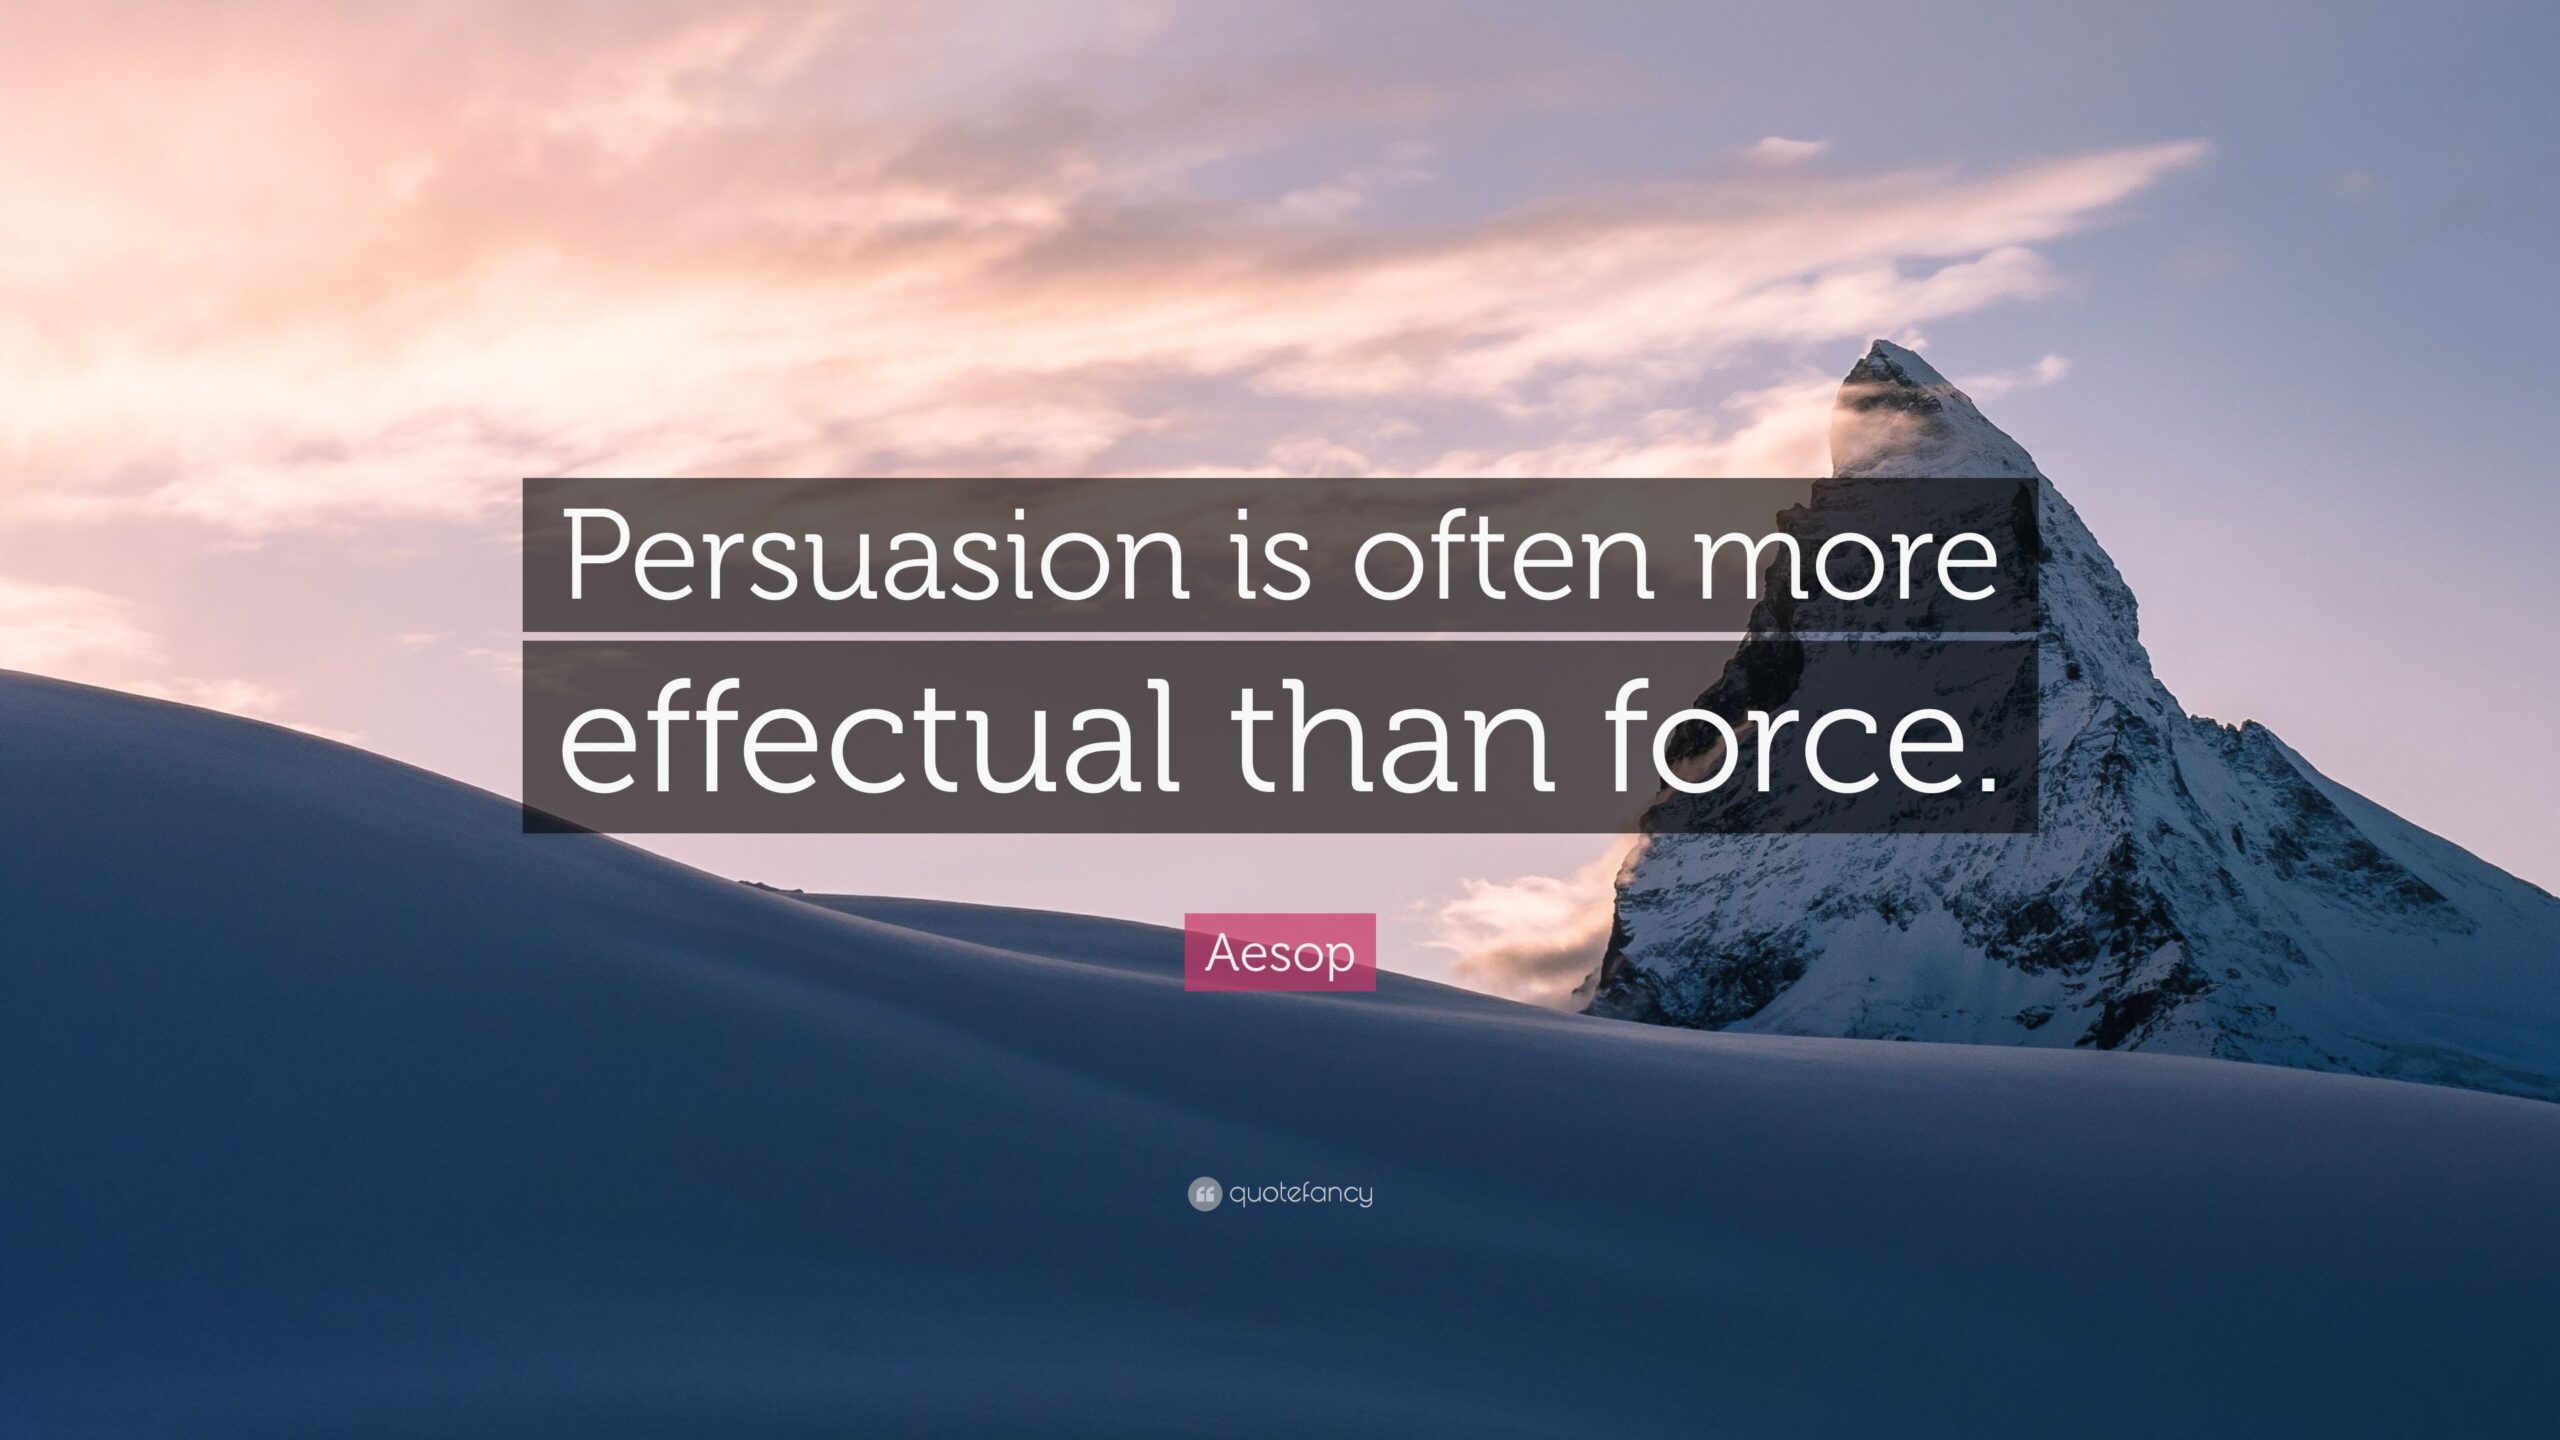 Persuasion is often more effectual than force